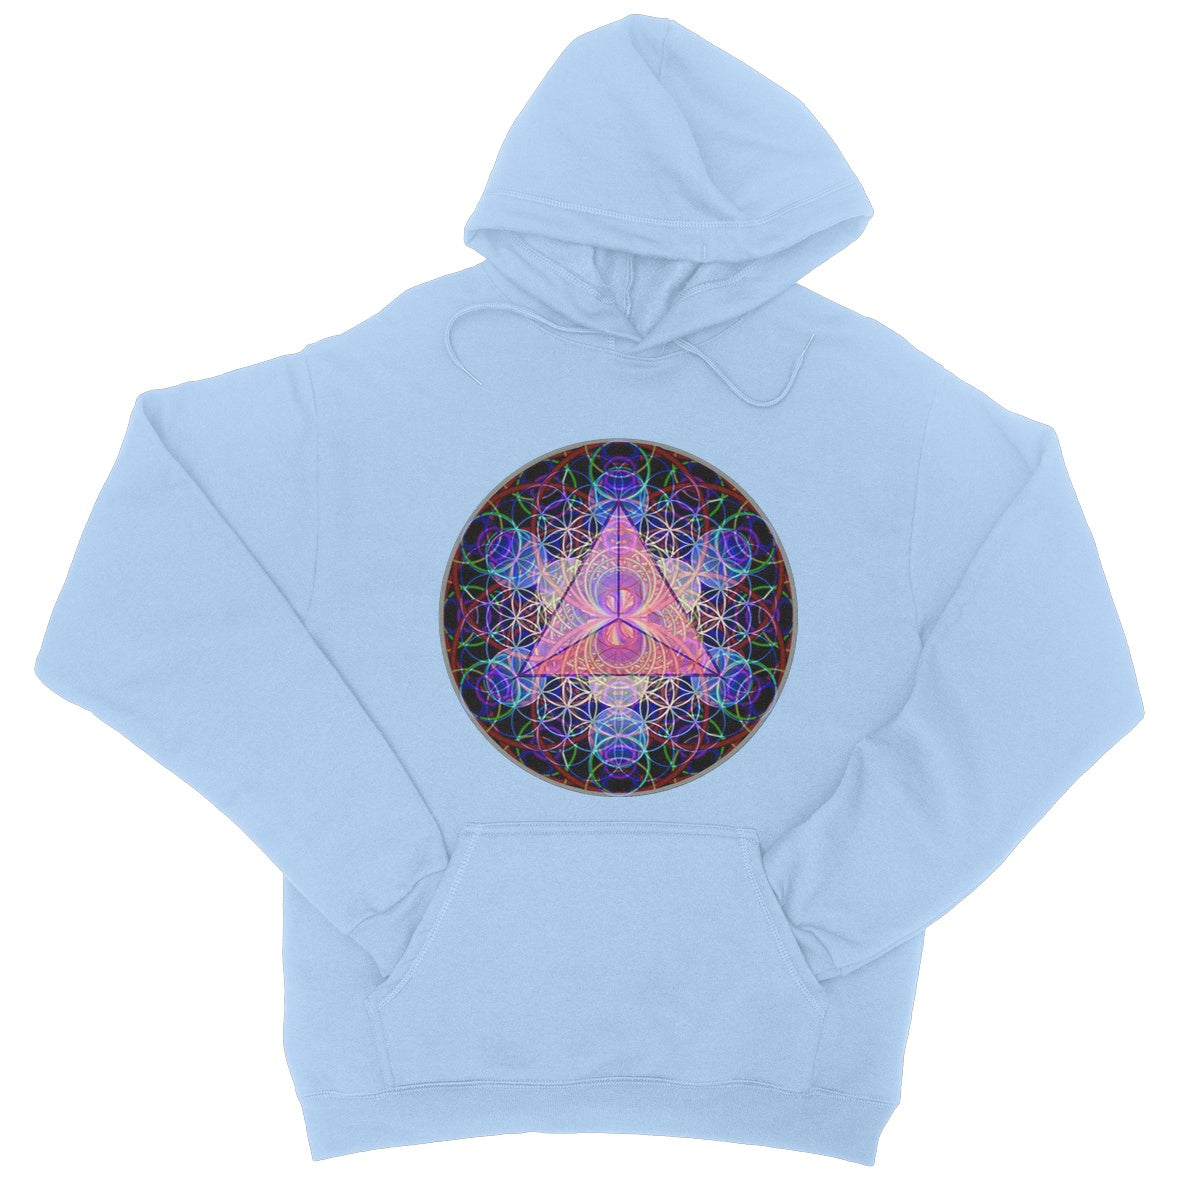 The Platonic Solid Tetrahedron College Hoodie